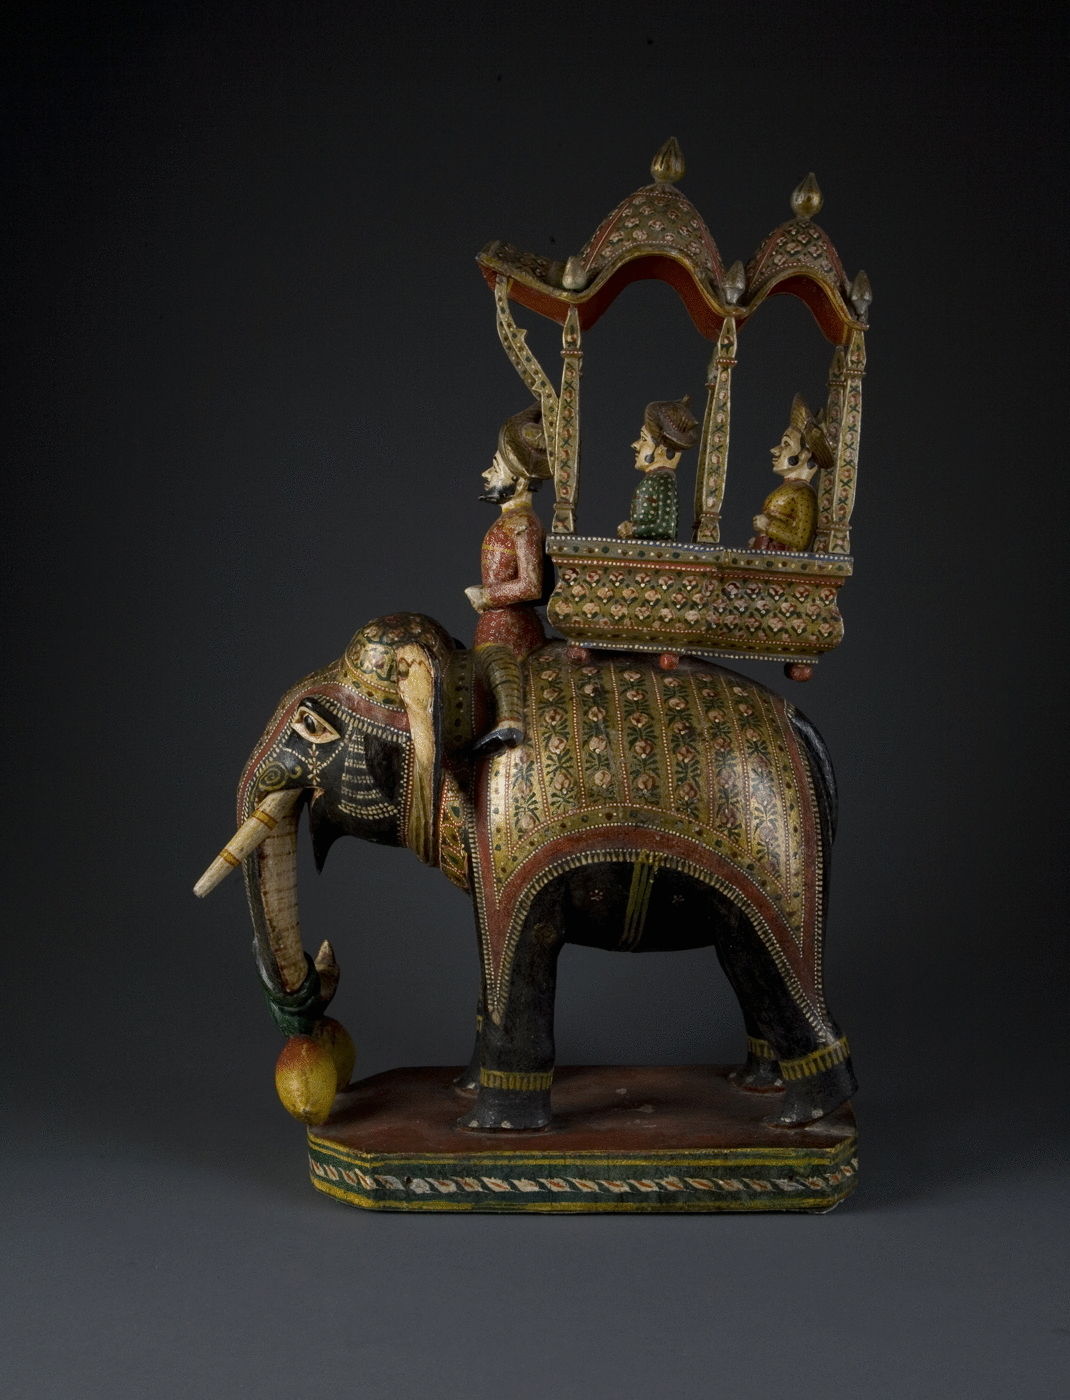 17.  A Polychrome Carved Wood Elephant With Mahout